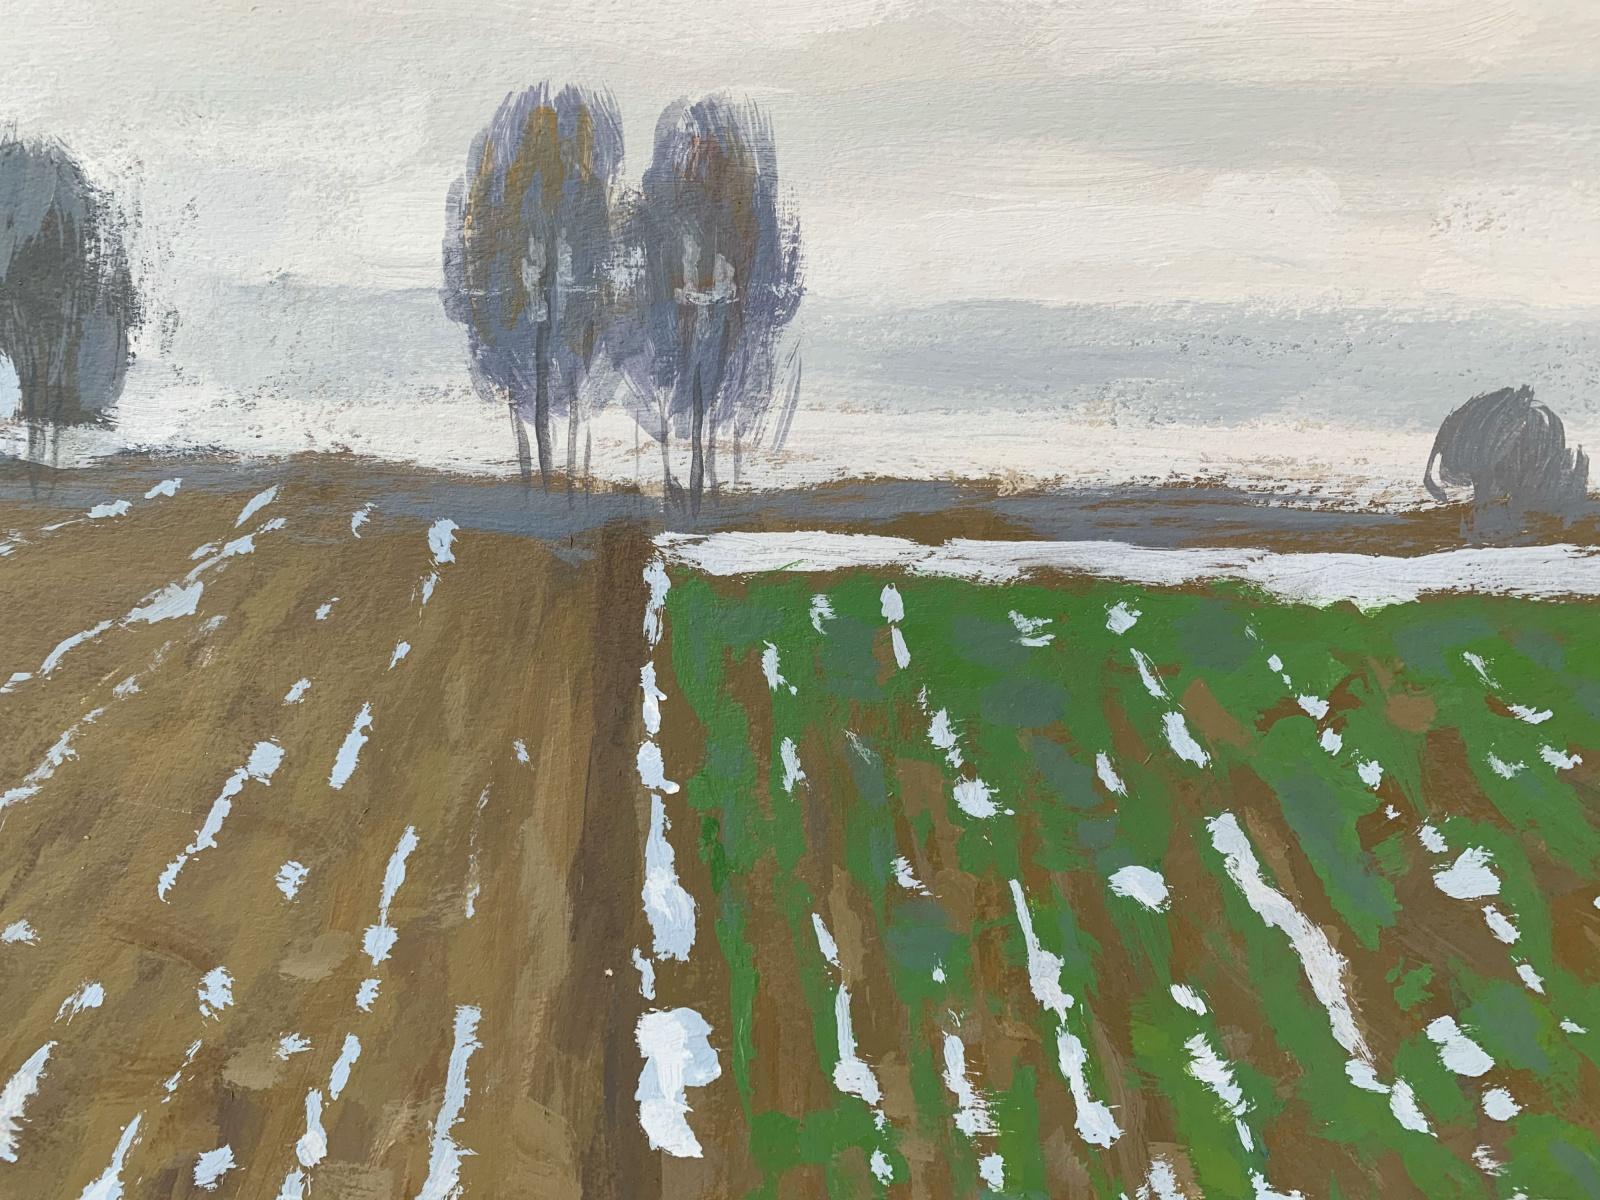 Pigsties - Figurative acrylic painting, Landscape, Rural view, Nature - Gray Figurative Painting by Mikołaj Malesza